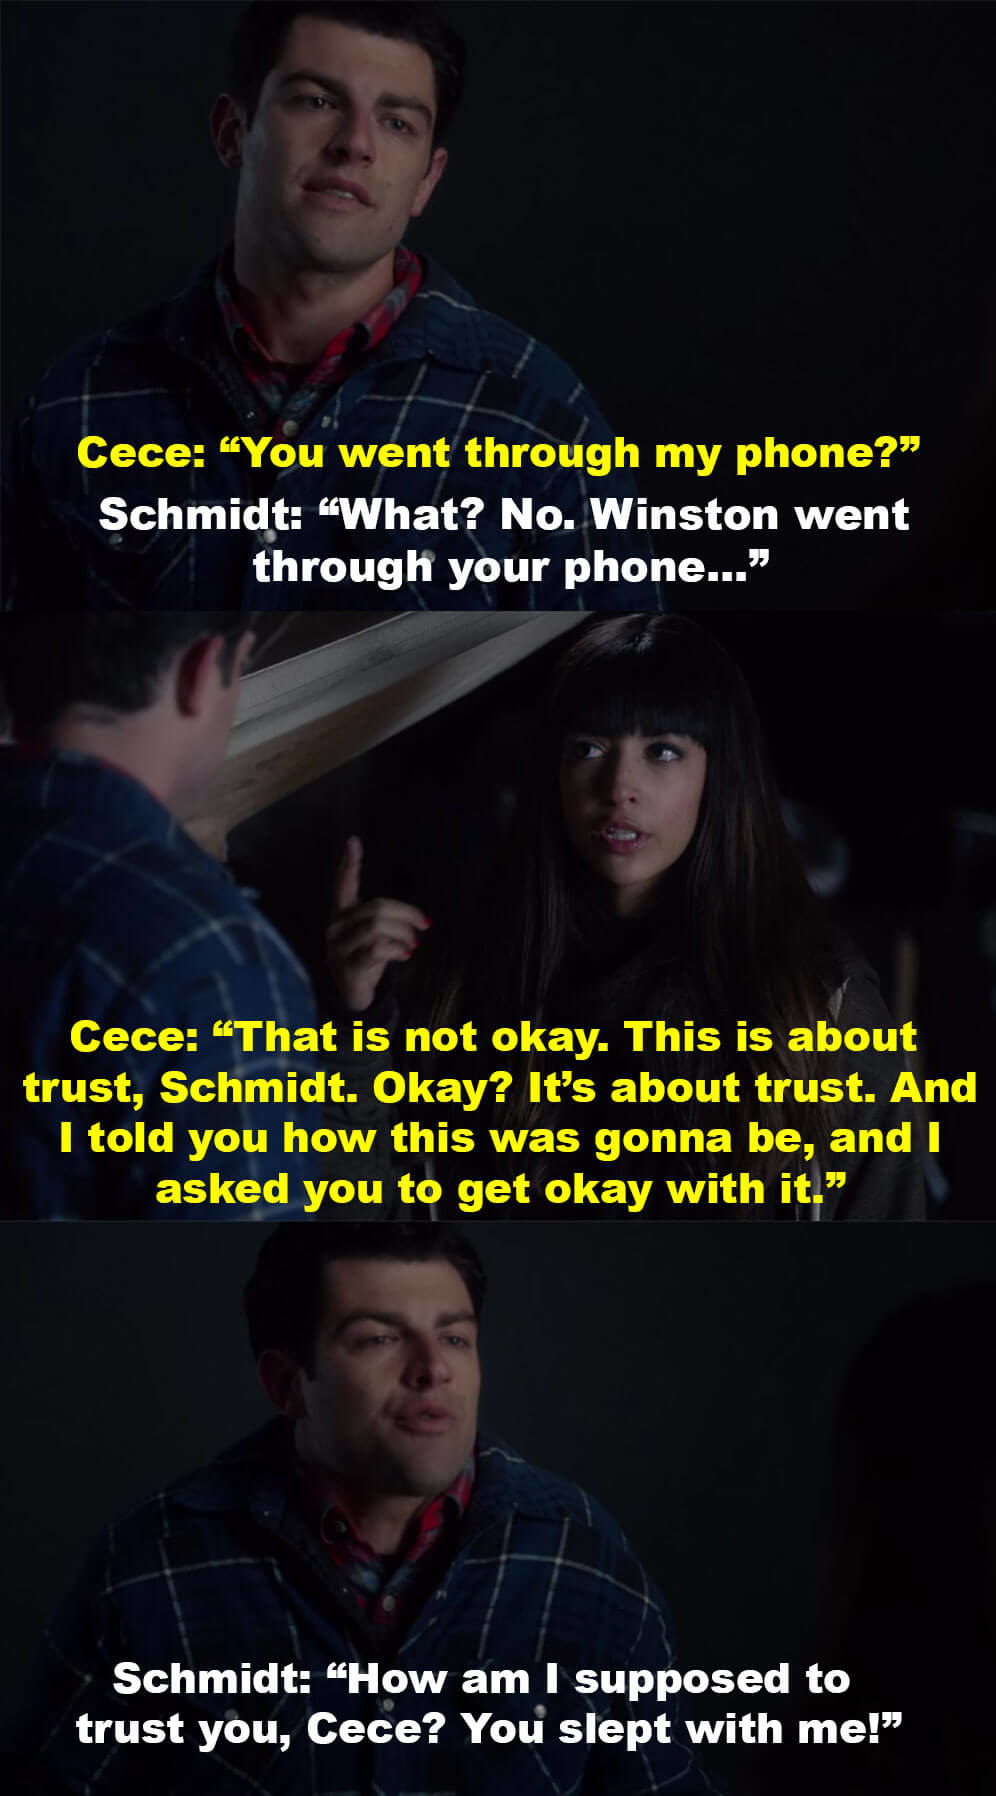 Cece realizes Schmidt went through her phone, and says it&#x27;s not okay and this relationship is about trust. Schmidt asks how he&#x27;s supposed to trust her when she slept with him